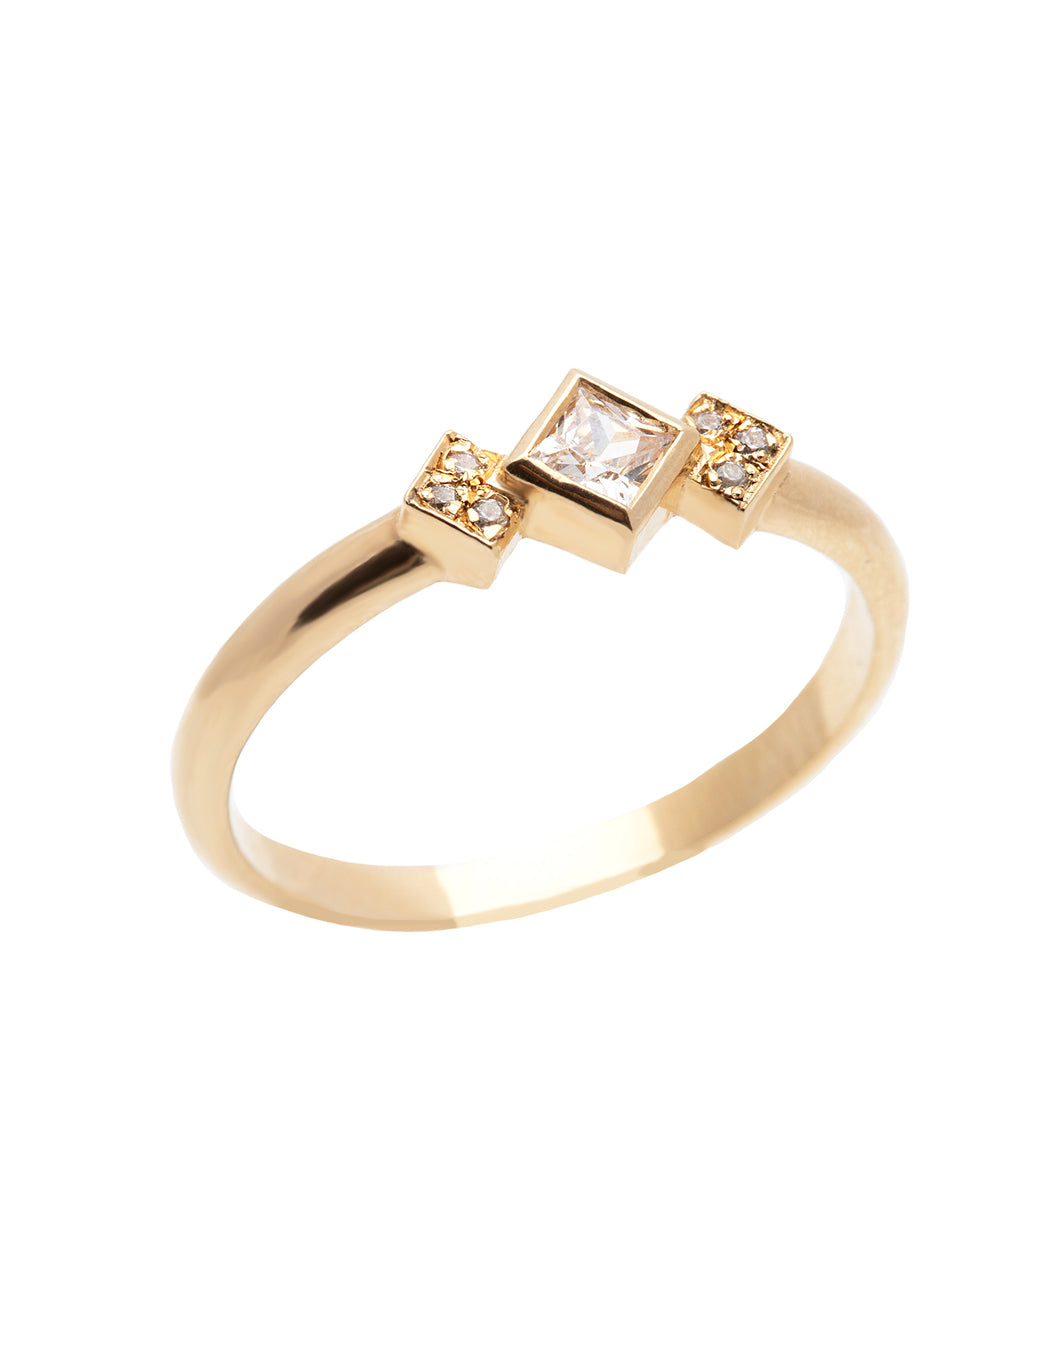 A delicate 14k yellow gold engagement ring, set with a center 0.25 carat princess cut white diamond, and three 0.01 carat brilliant cut white diamonds on each side.